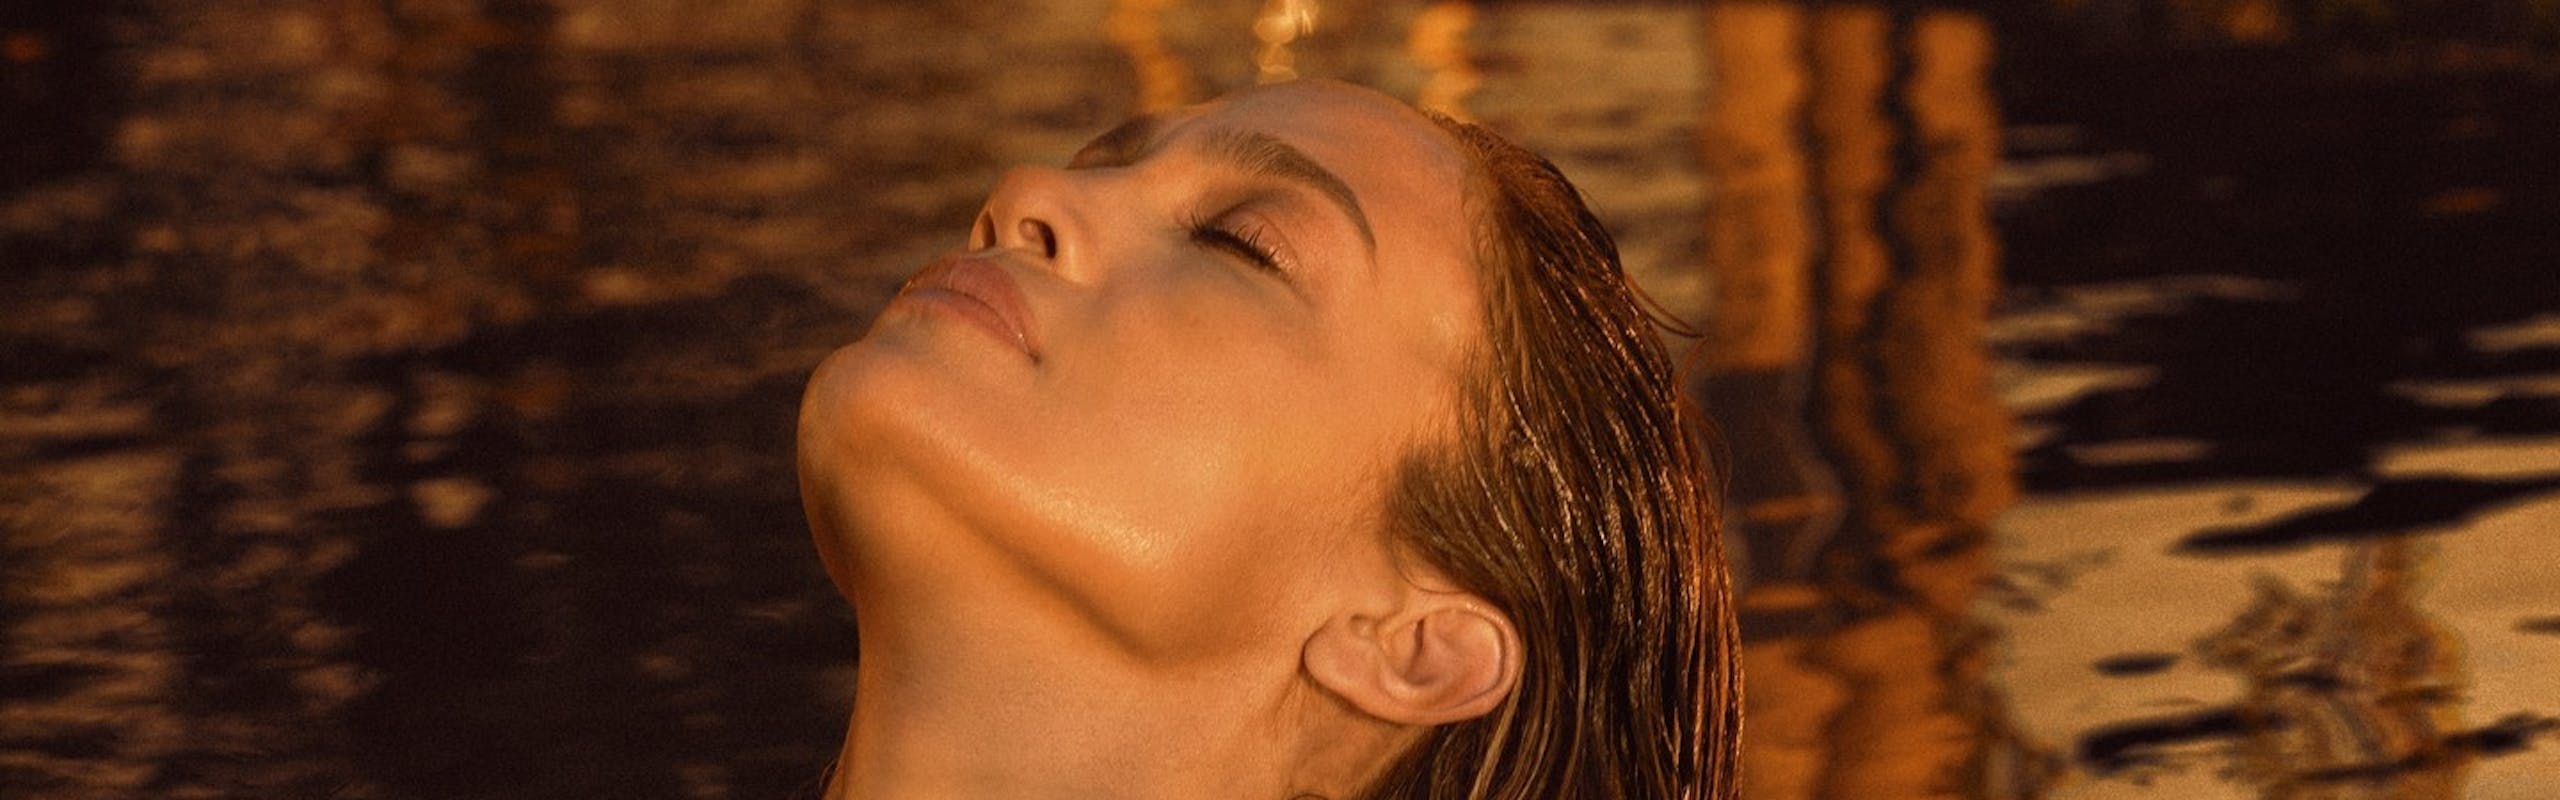 JLo in a pool at golden hour.